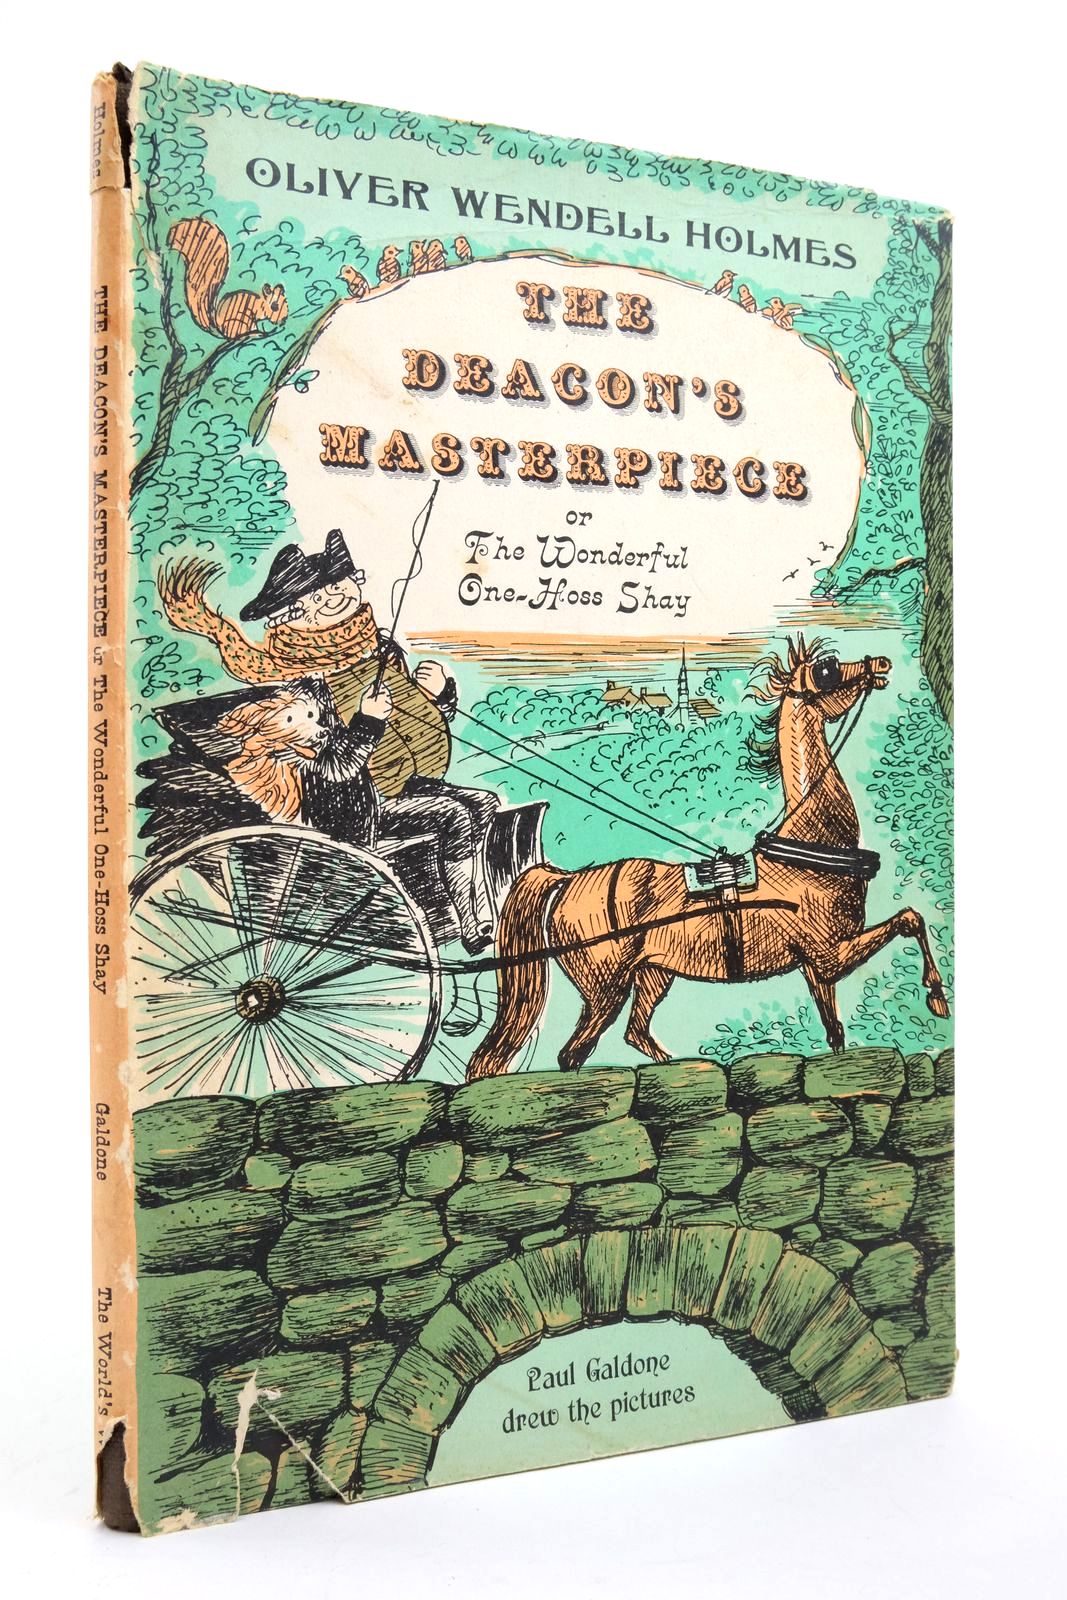 Photo of THE DEACON'S MASTERPIECE OR THE WONDERFUL ONE-HOSS SHAY written by Holmes, Oliver Wendell illustrated by Galdone, Paul published by World's Work Ltd. (STOCK CODE: 2138747)  for sale by Stella & Rose's Books